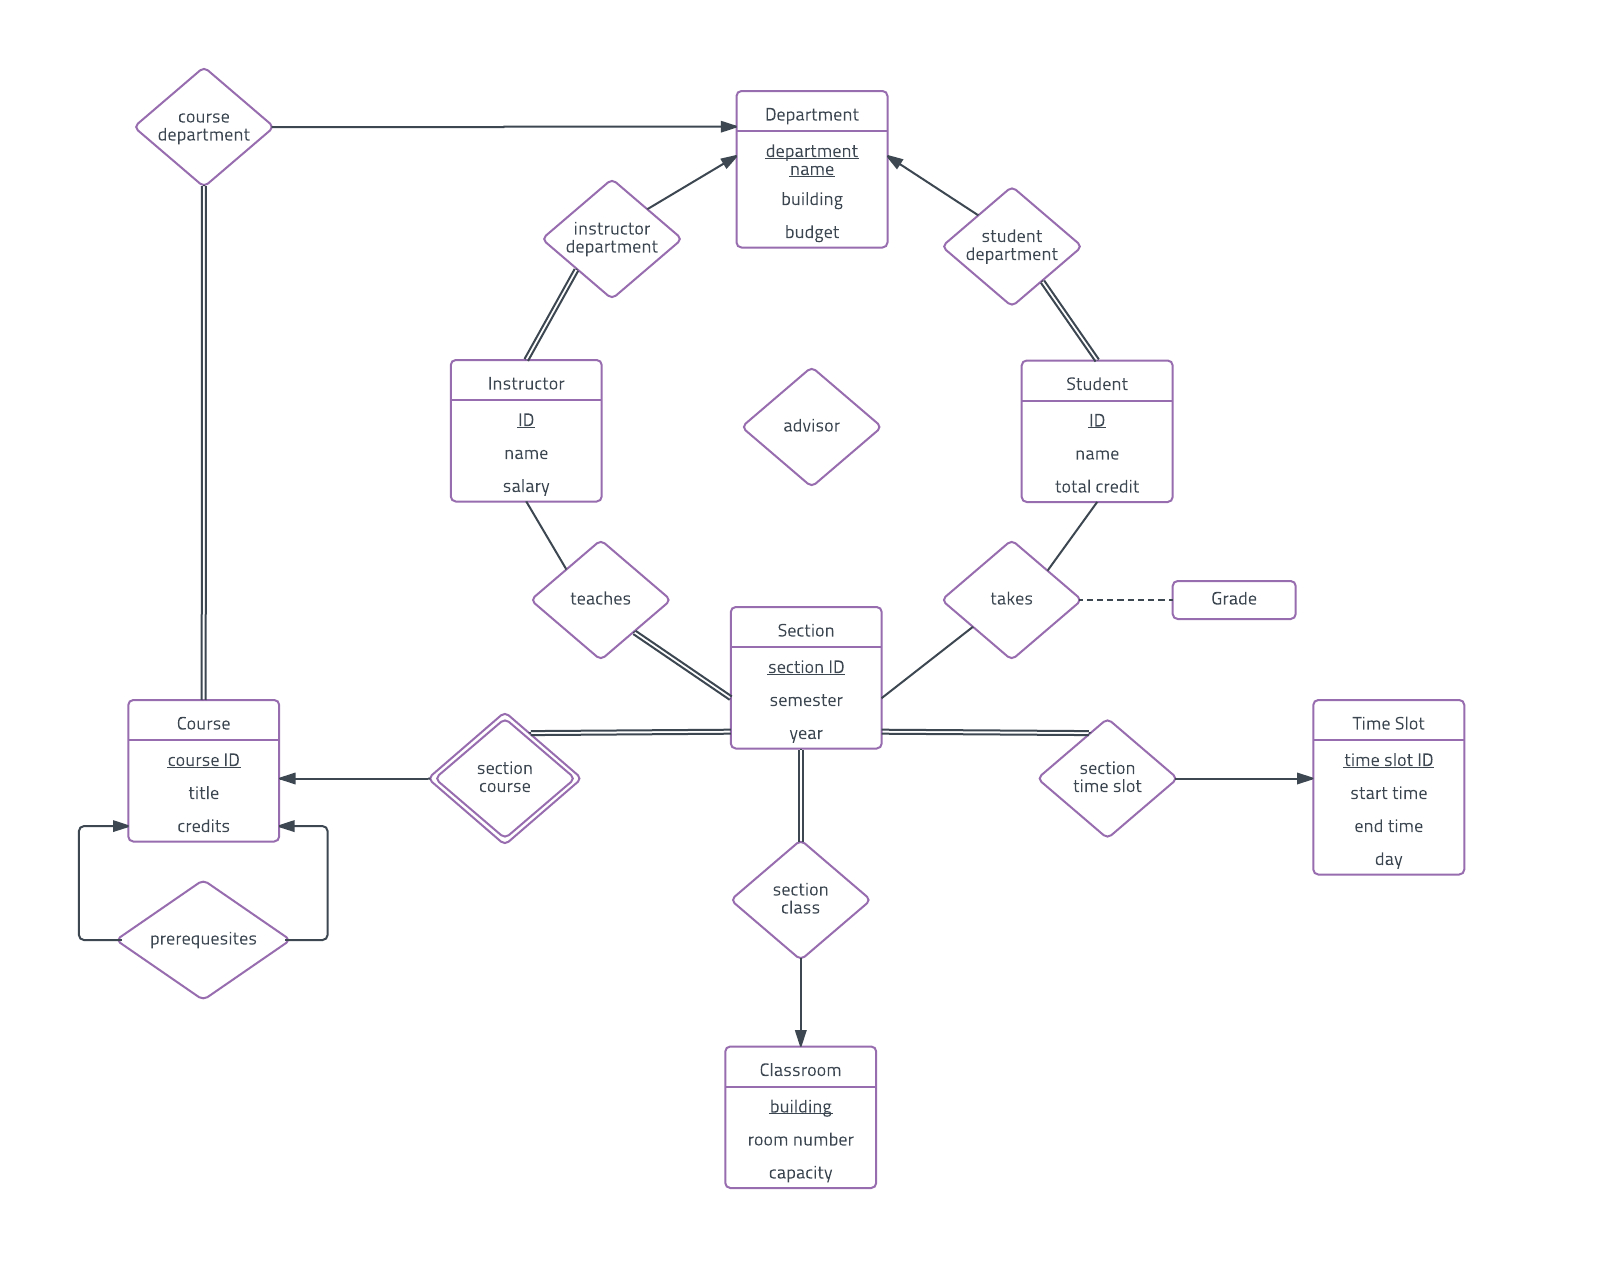 Er Diagram Examples And Templates | Lucidchart with regard to Er Diagram Examples Hospital Management